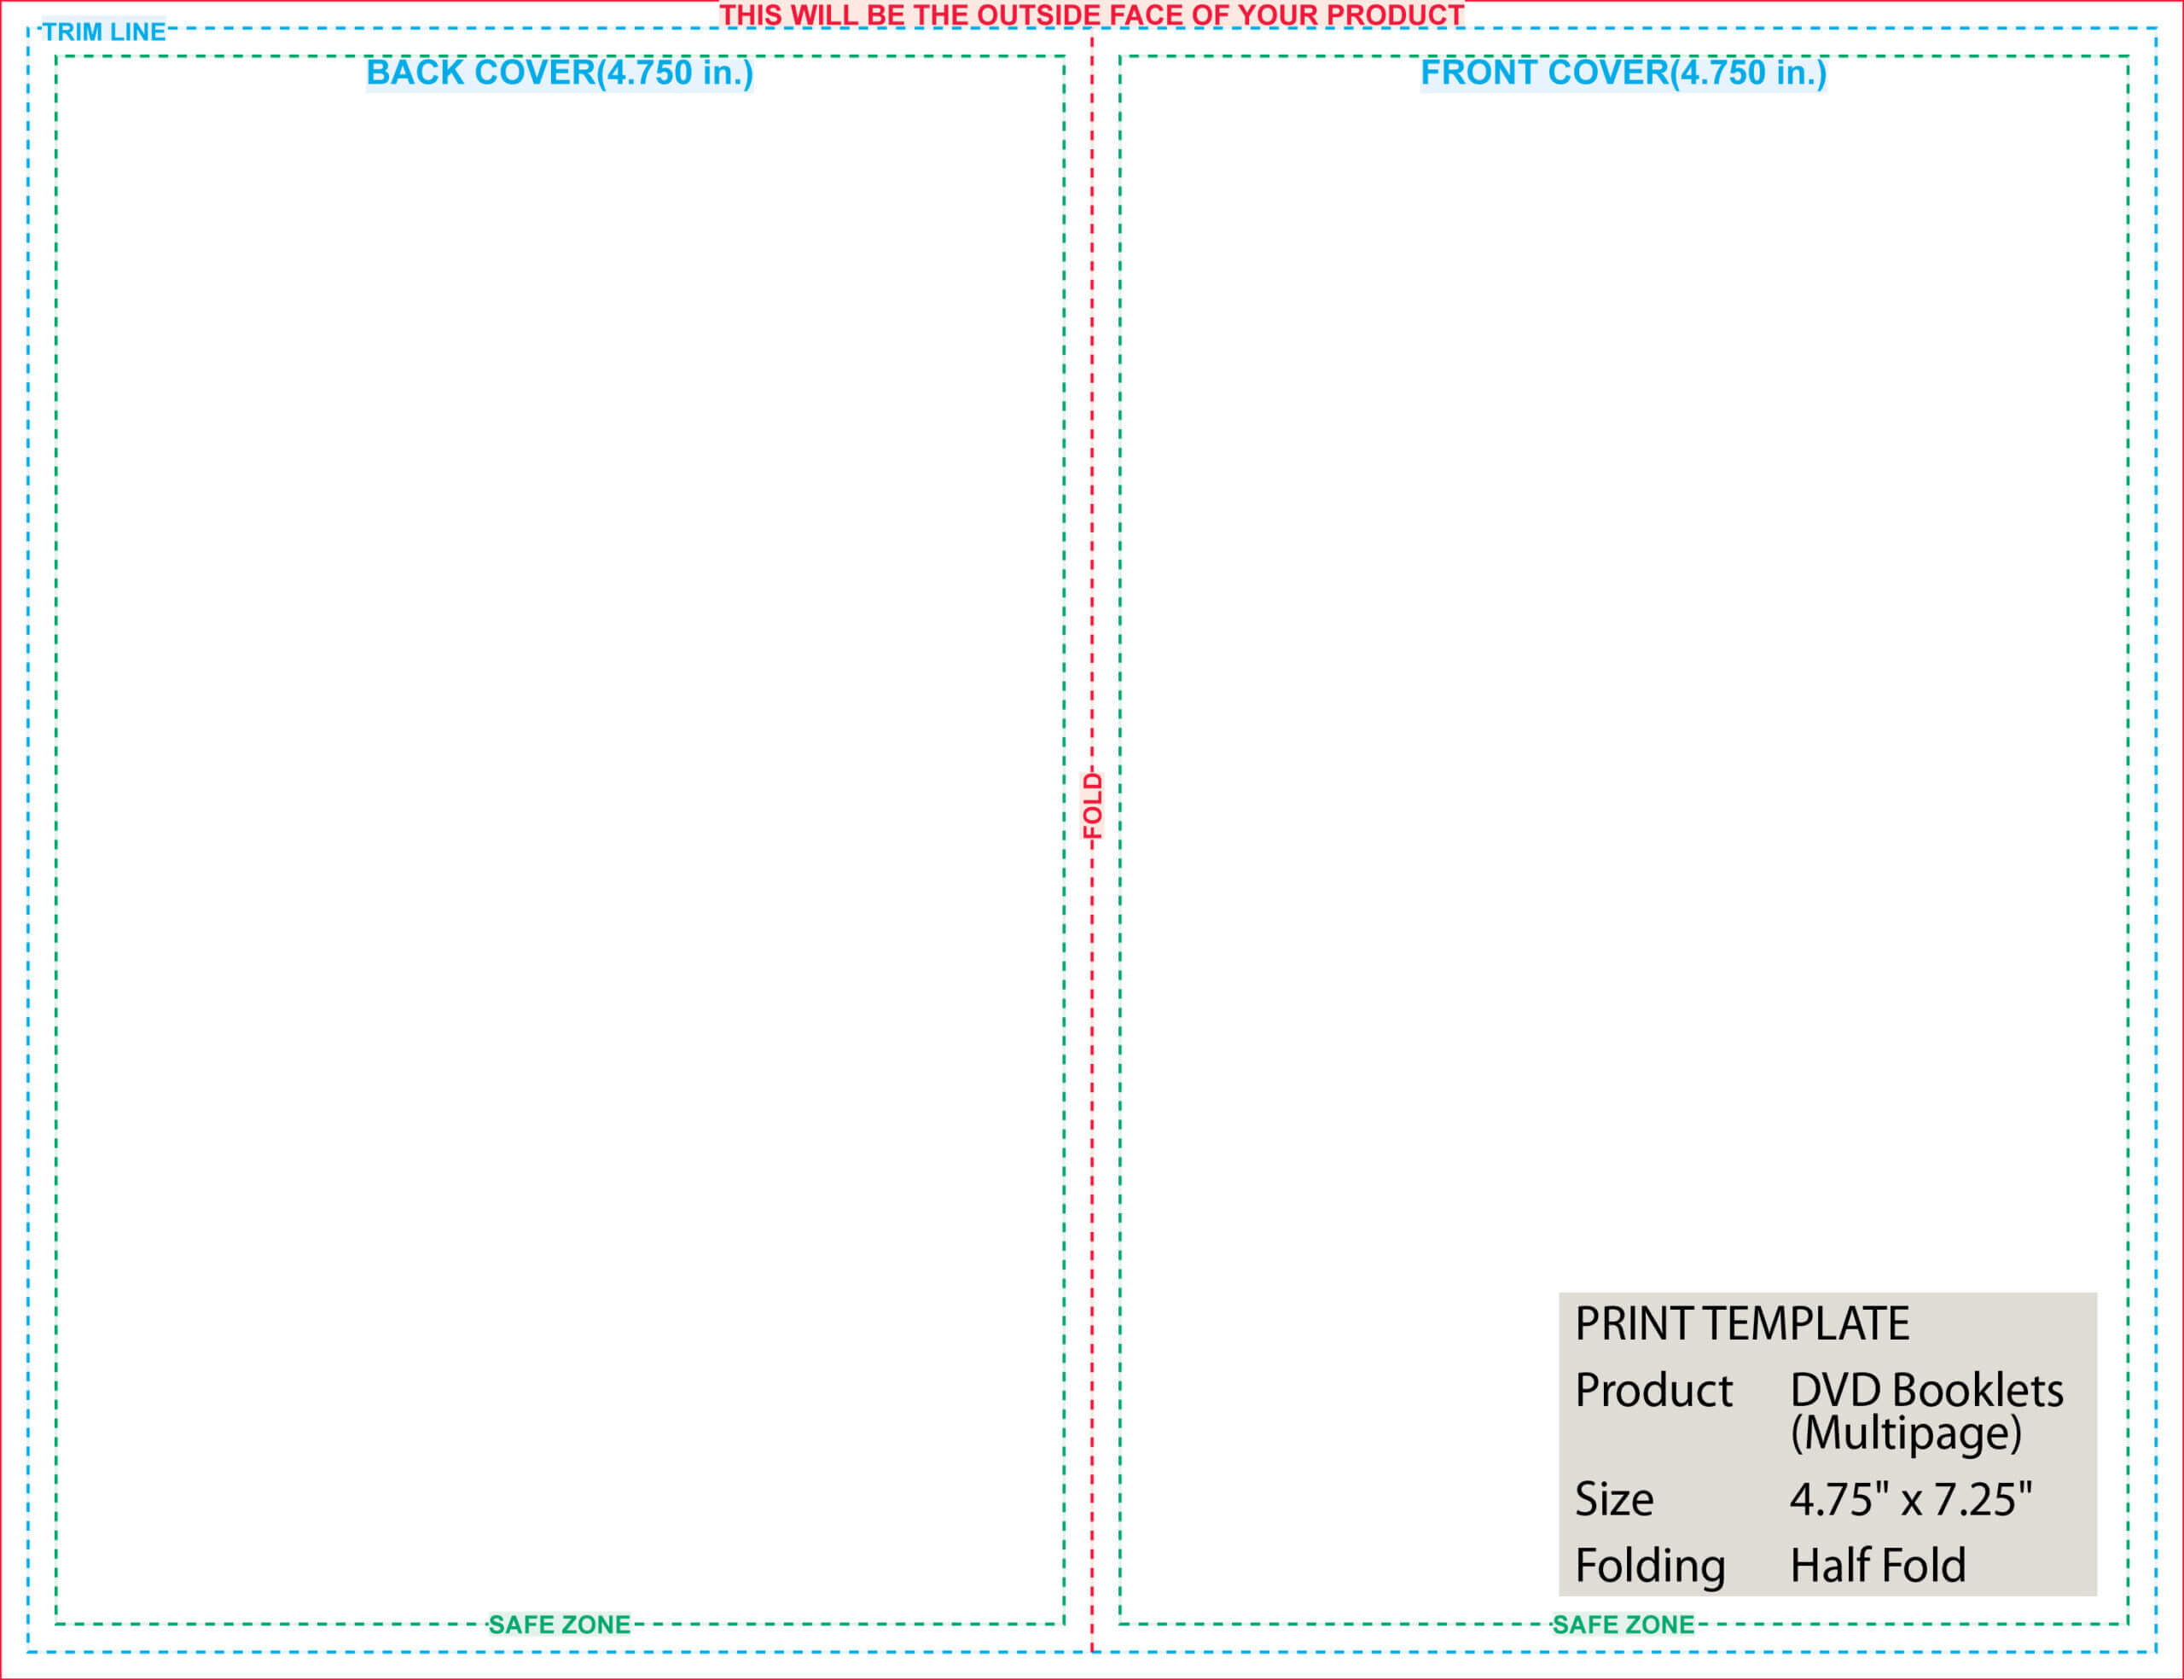 007 Template Ideas 75X7 25 Multipage Dvd Booklets Quarter With Half Fold Card Template